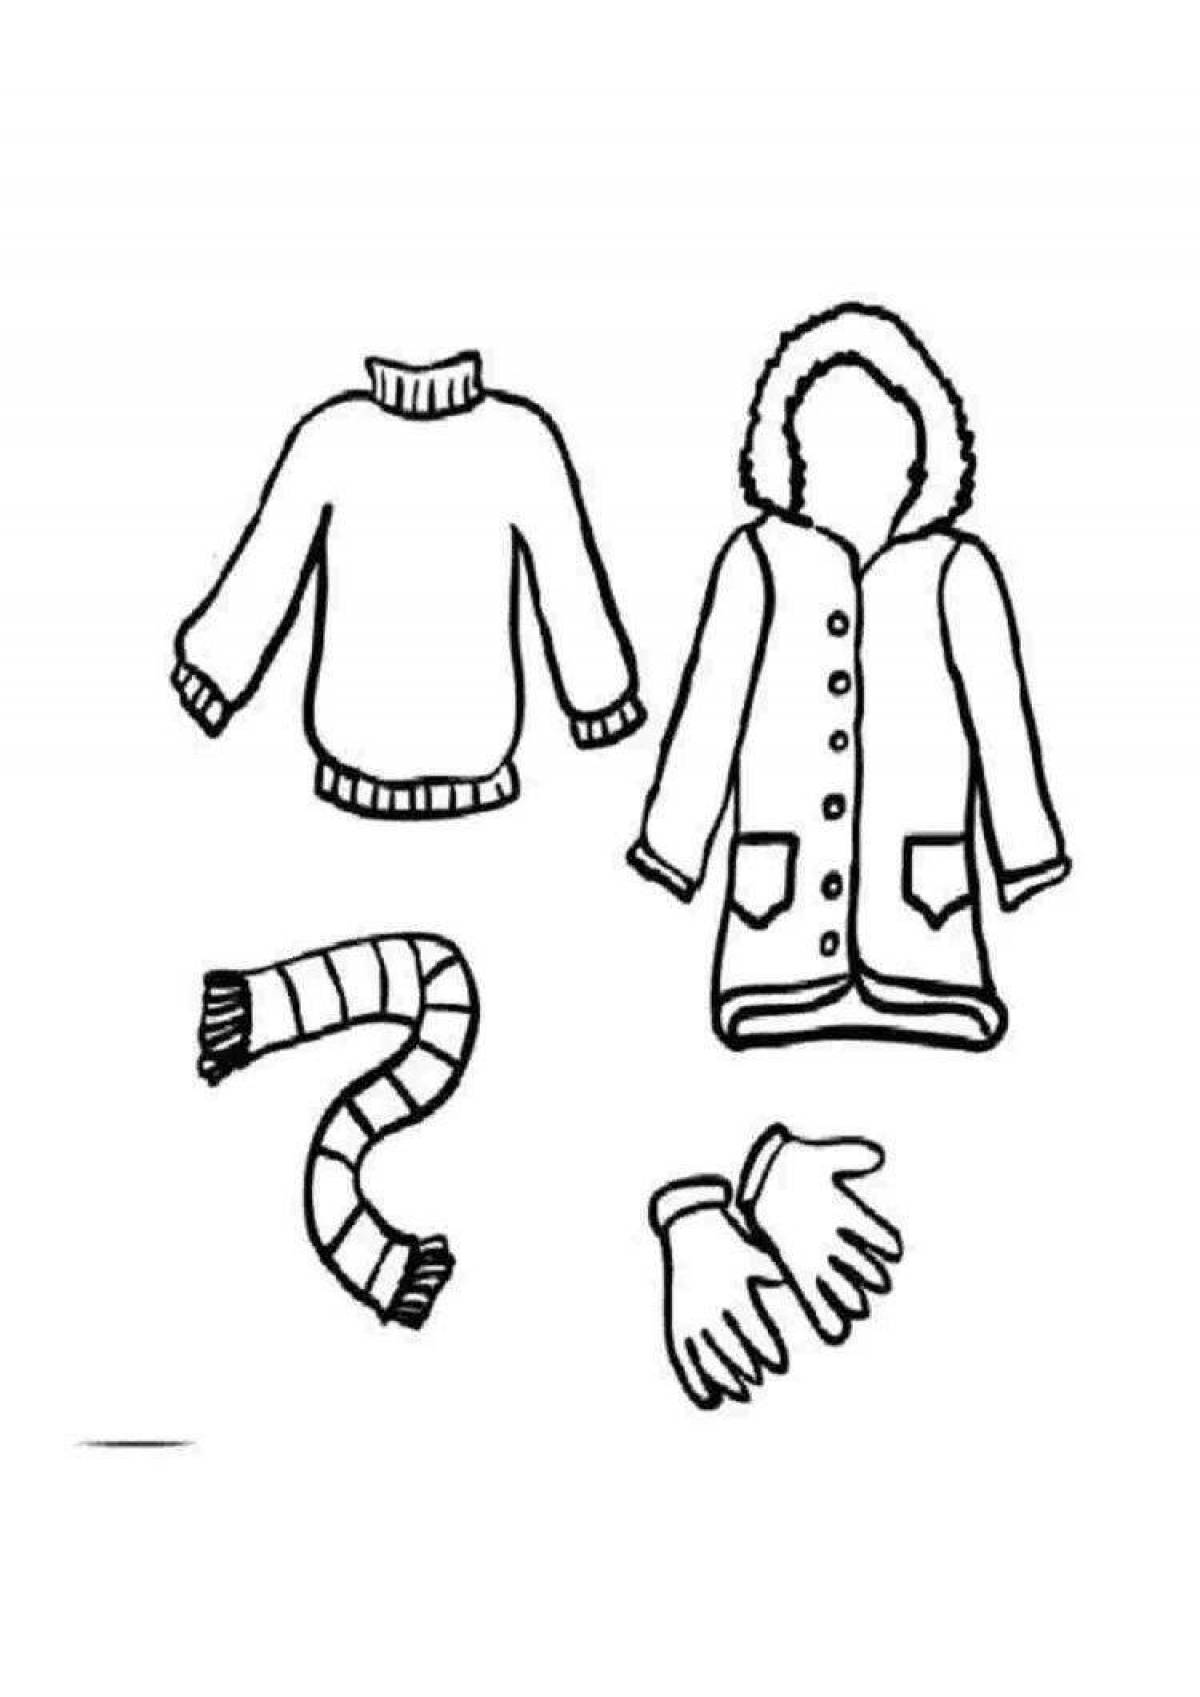 Types of clothing for children #8